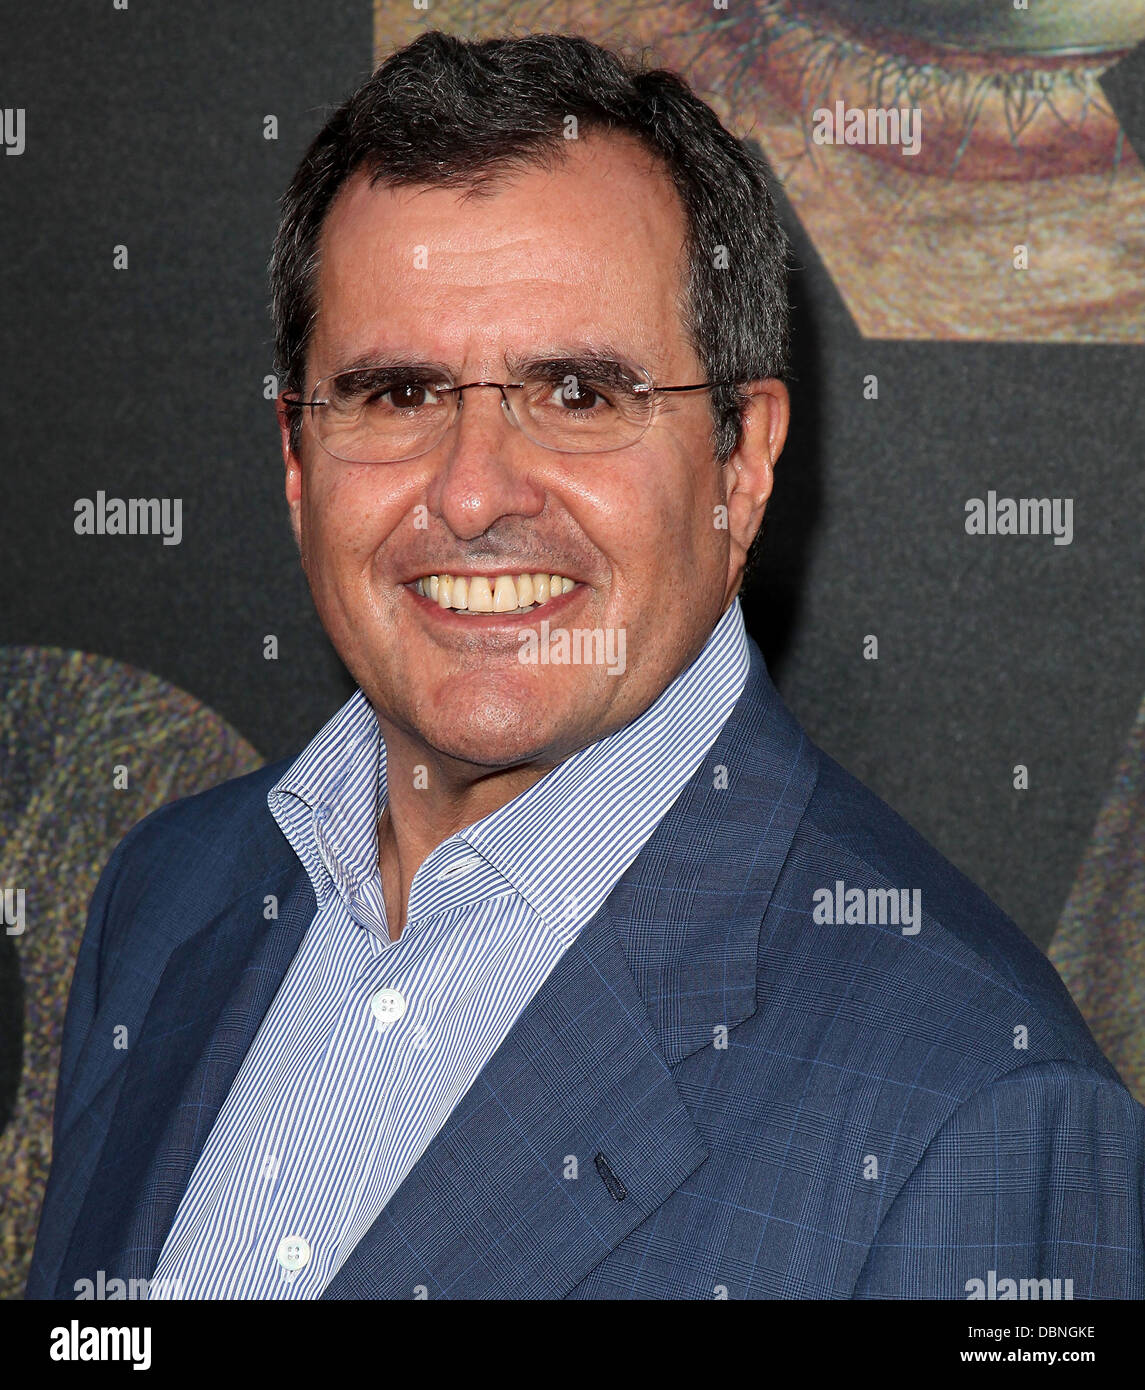 Producer Peter Chernin The premiere of 20th Century Fox's 'Rise Of The Planet Of The Apes' held at Grauman's Chinese Theatre - Arrivals Hollywood, California - 28.07.11 Stock Photo